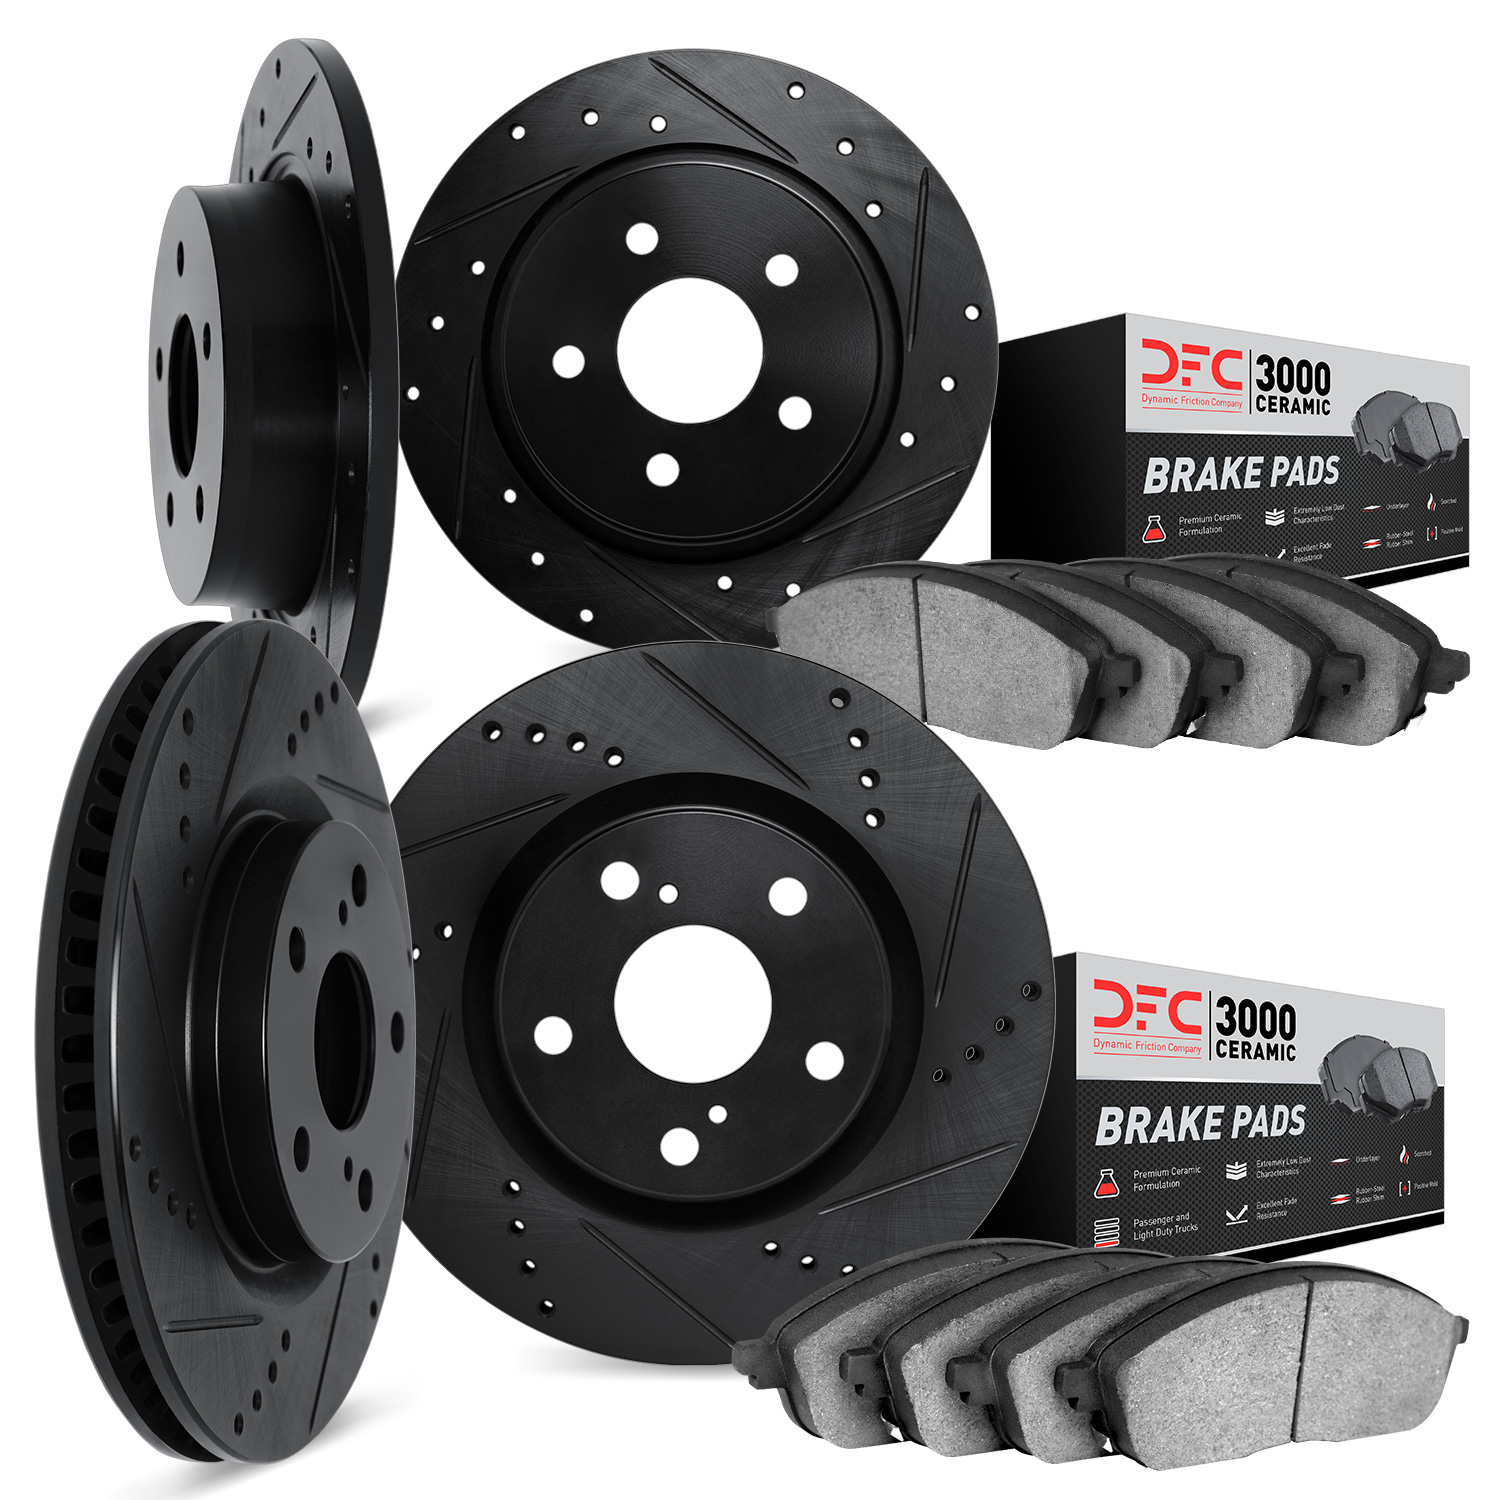 8304-39007 Drilled/Slotted Brake Rotors with 3000-Series Ceramic Brake Pads Kit [Black], 2006-2007 Mopar, Position: Front and Re